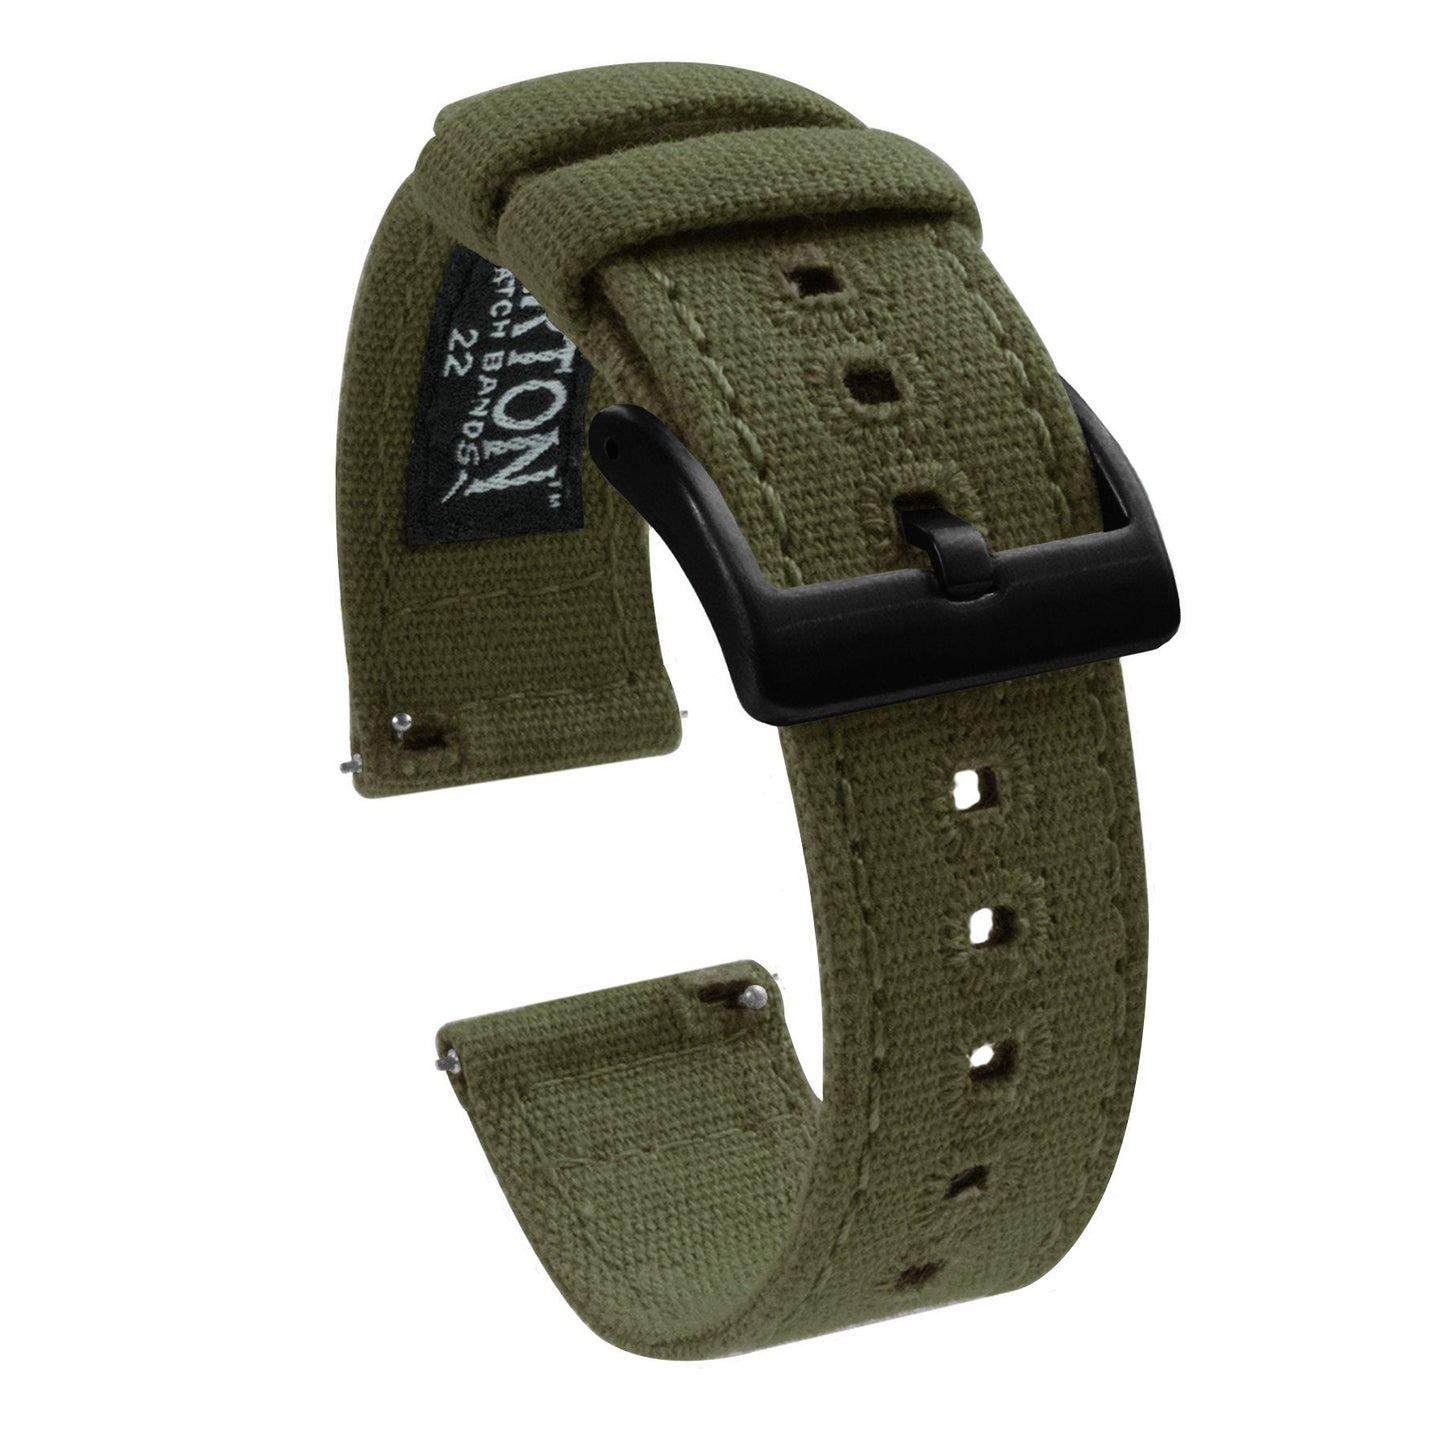 Fossil Gen 5 | Army Green Canvas by Barton Watch Bands